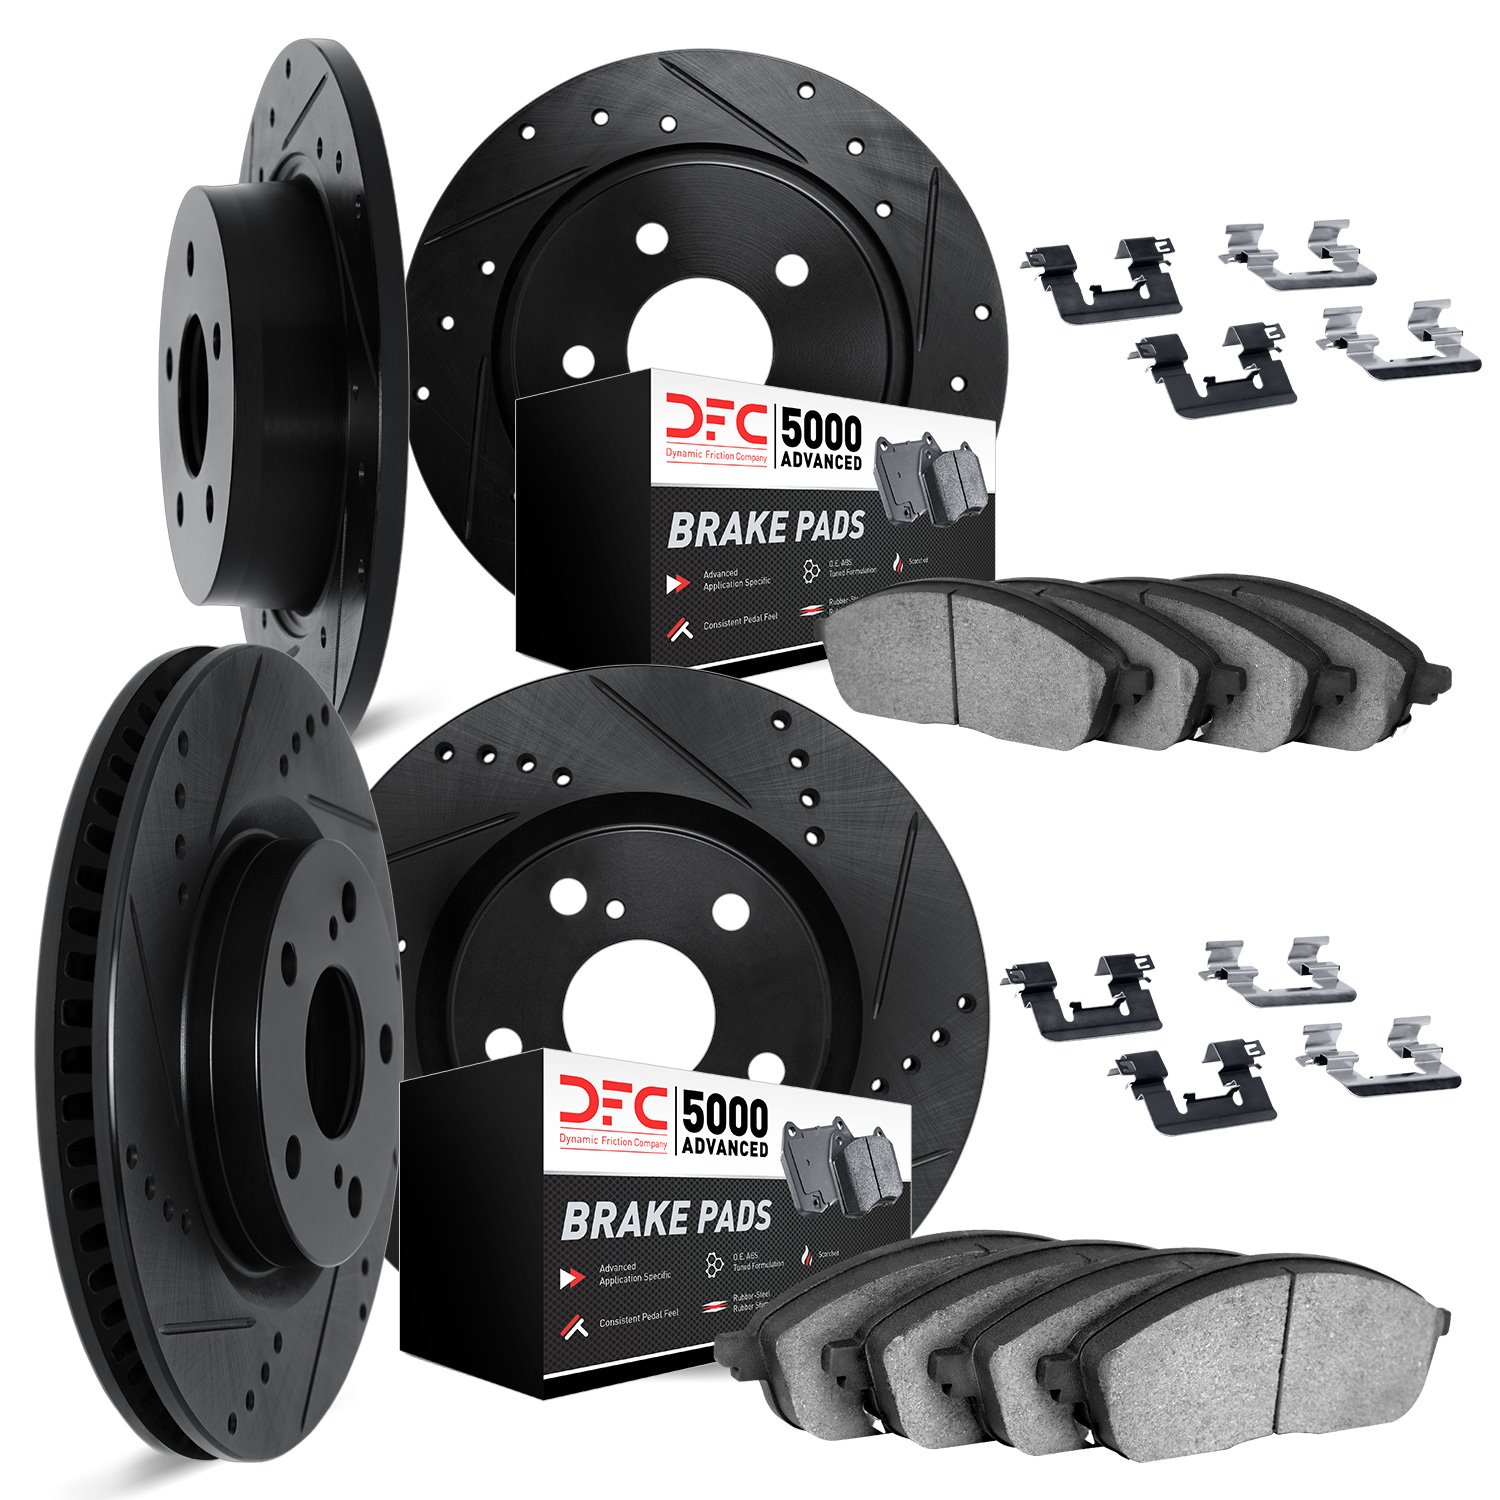 8514-31018 Drilled/Slotted Brake Rotors w/5000 Advanced Brake Pads Kit & Hardware [Black], 2007-2012 BMW, Position: Front and Re